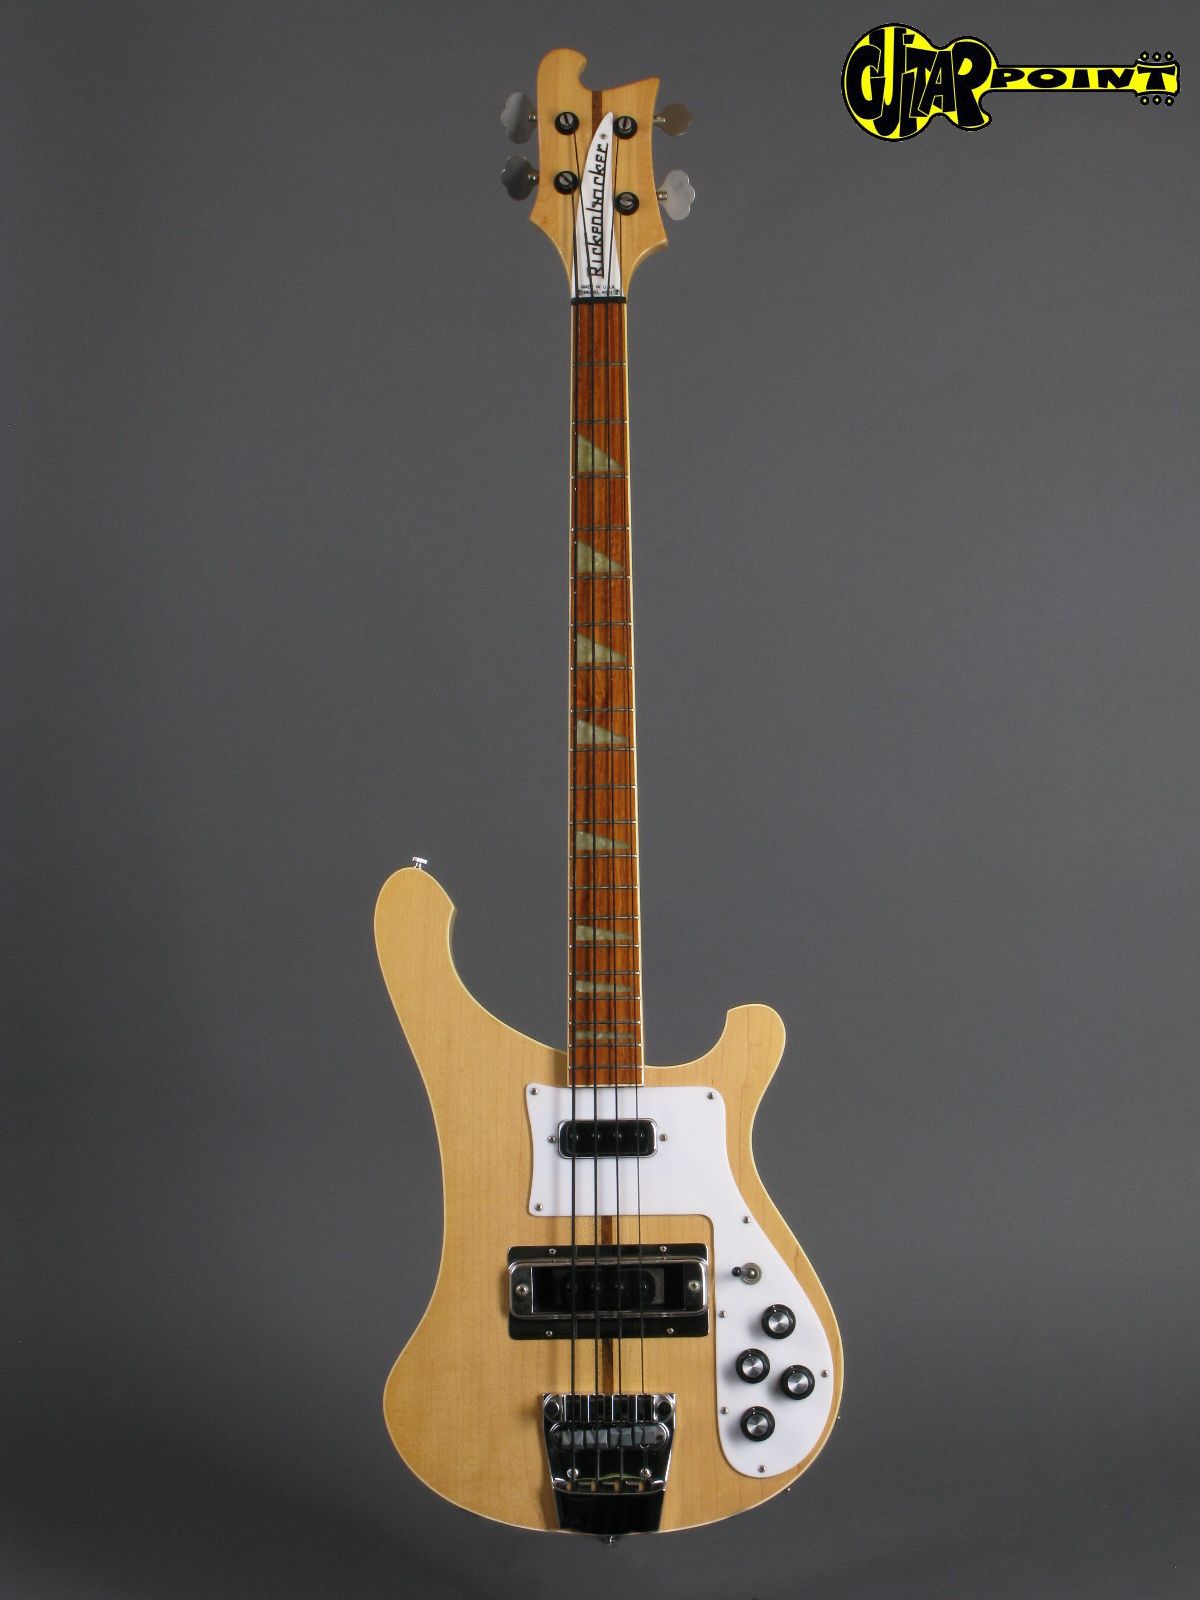 scarbee rickenbacker bass how to bend